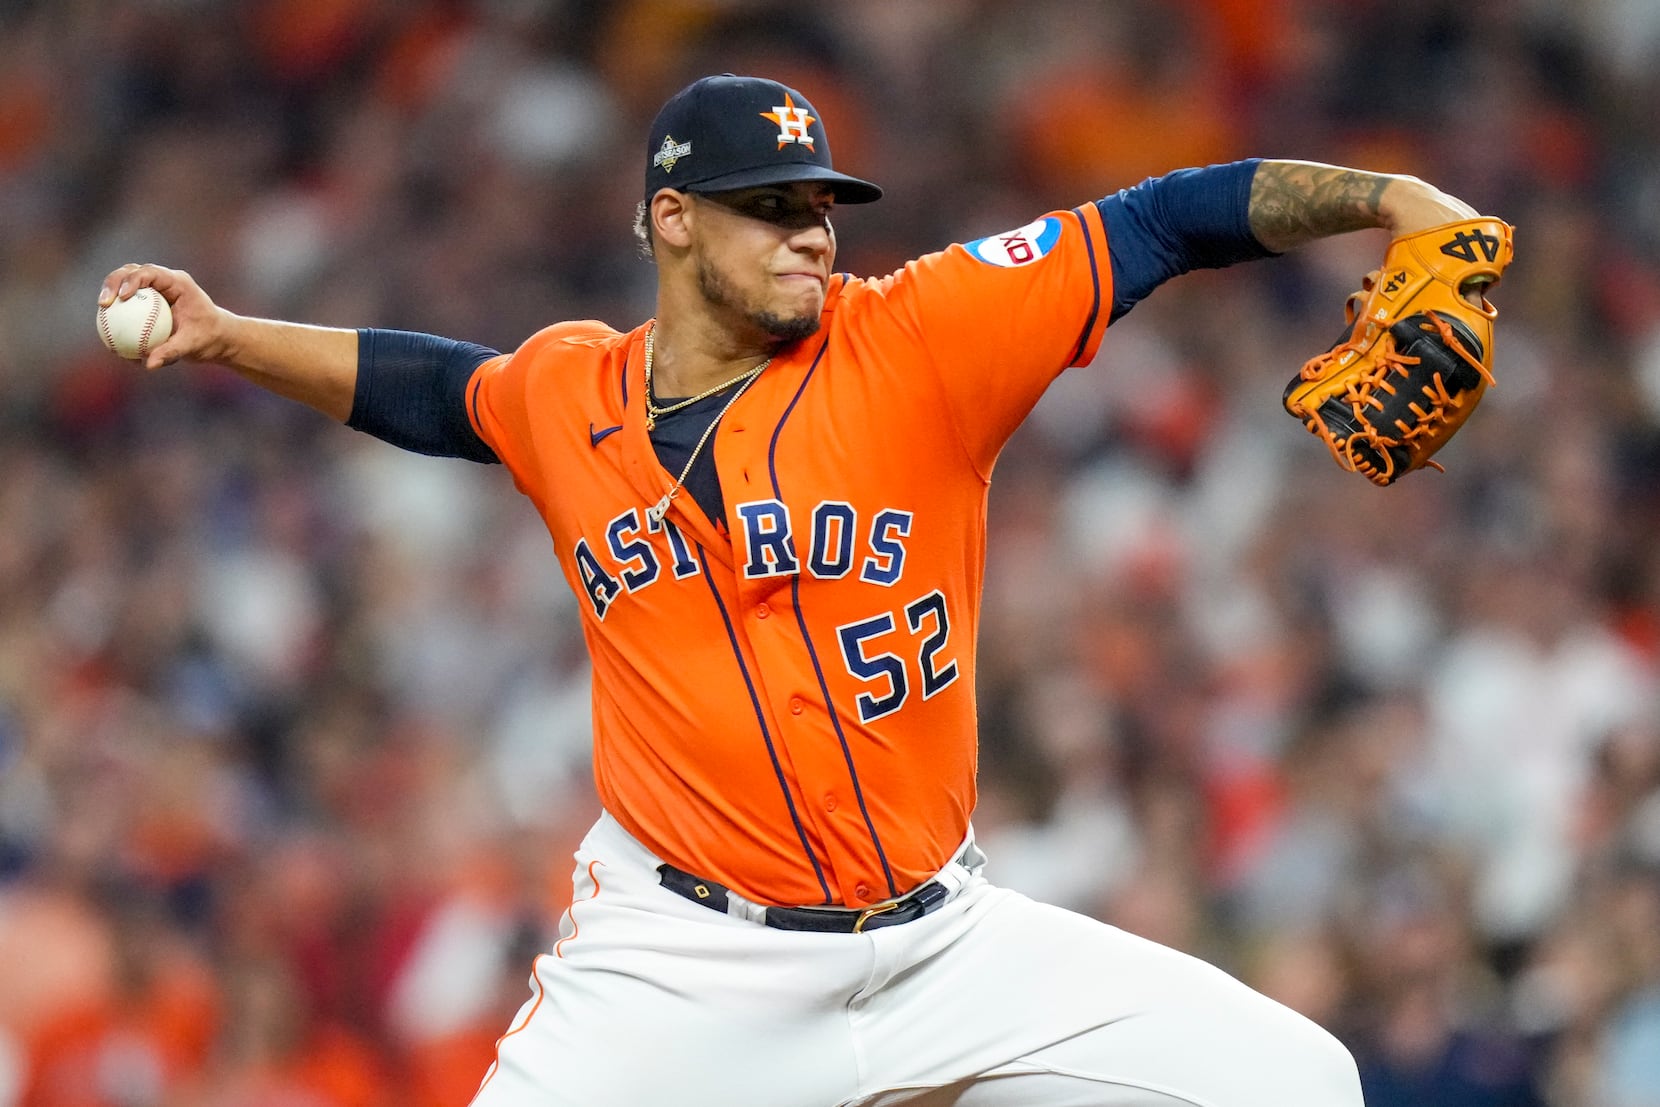 Astros' Abreu suspended two games for throwing at Rangers' Garcia